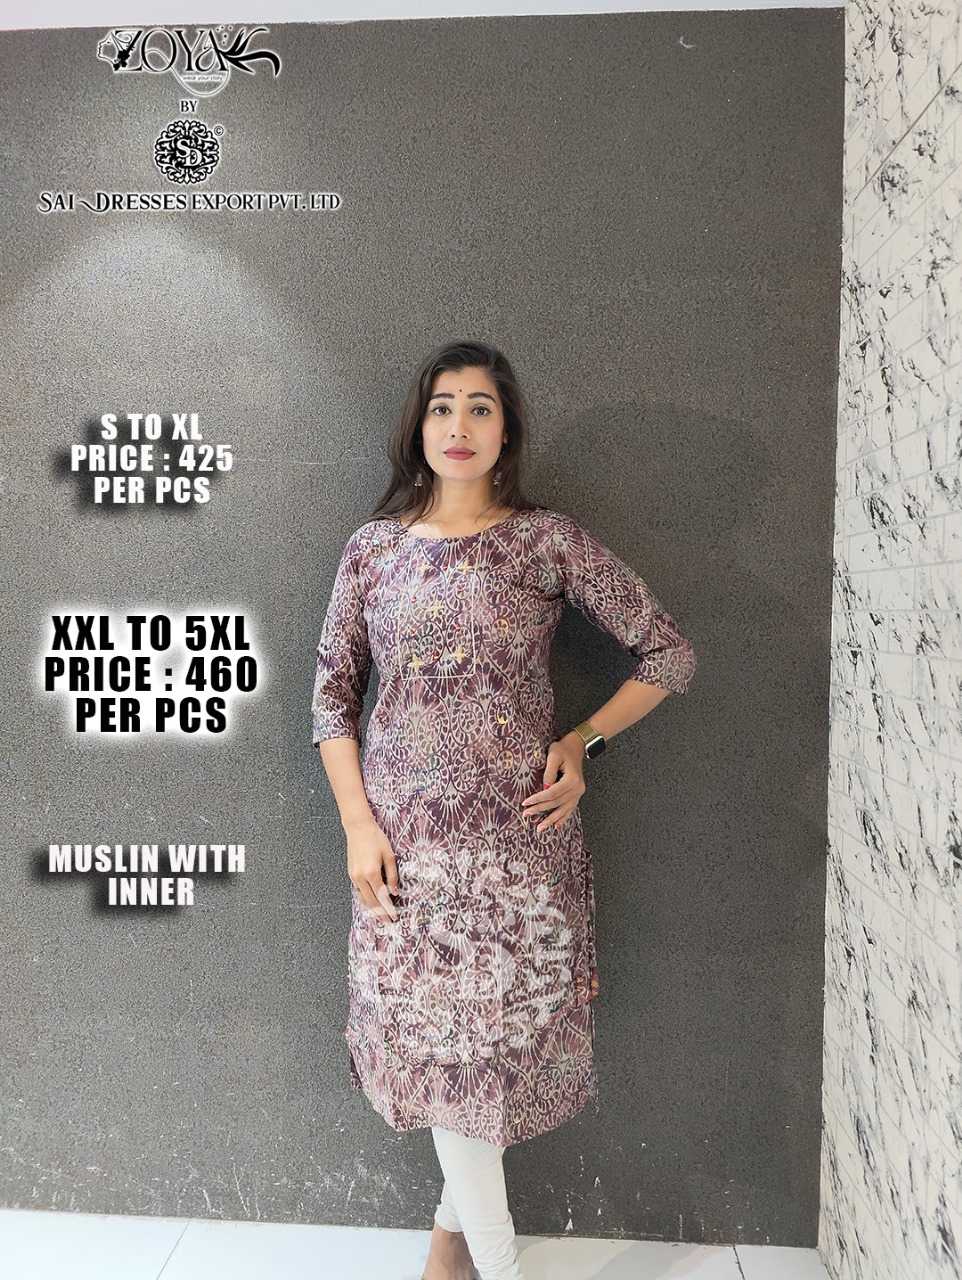 SAI DRESSES PRESENT D.NO SD85 READY TO WEAR BEAUTIFUL MUSLIN PRINTED STRAIGHT KURTI COMBO COLLECTION IN WHOLESALE RATE IN SURAT